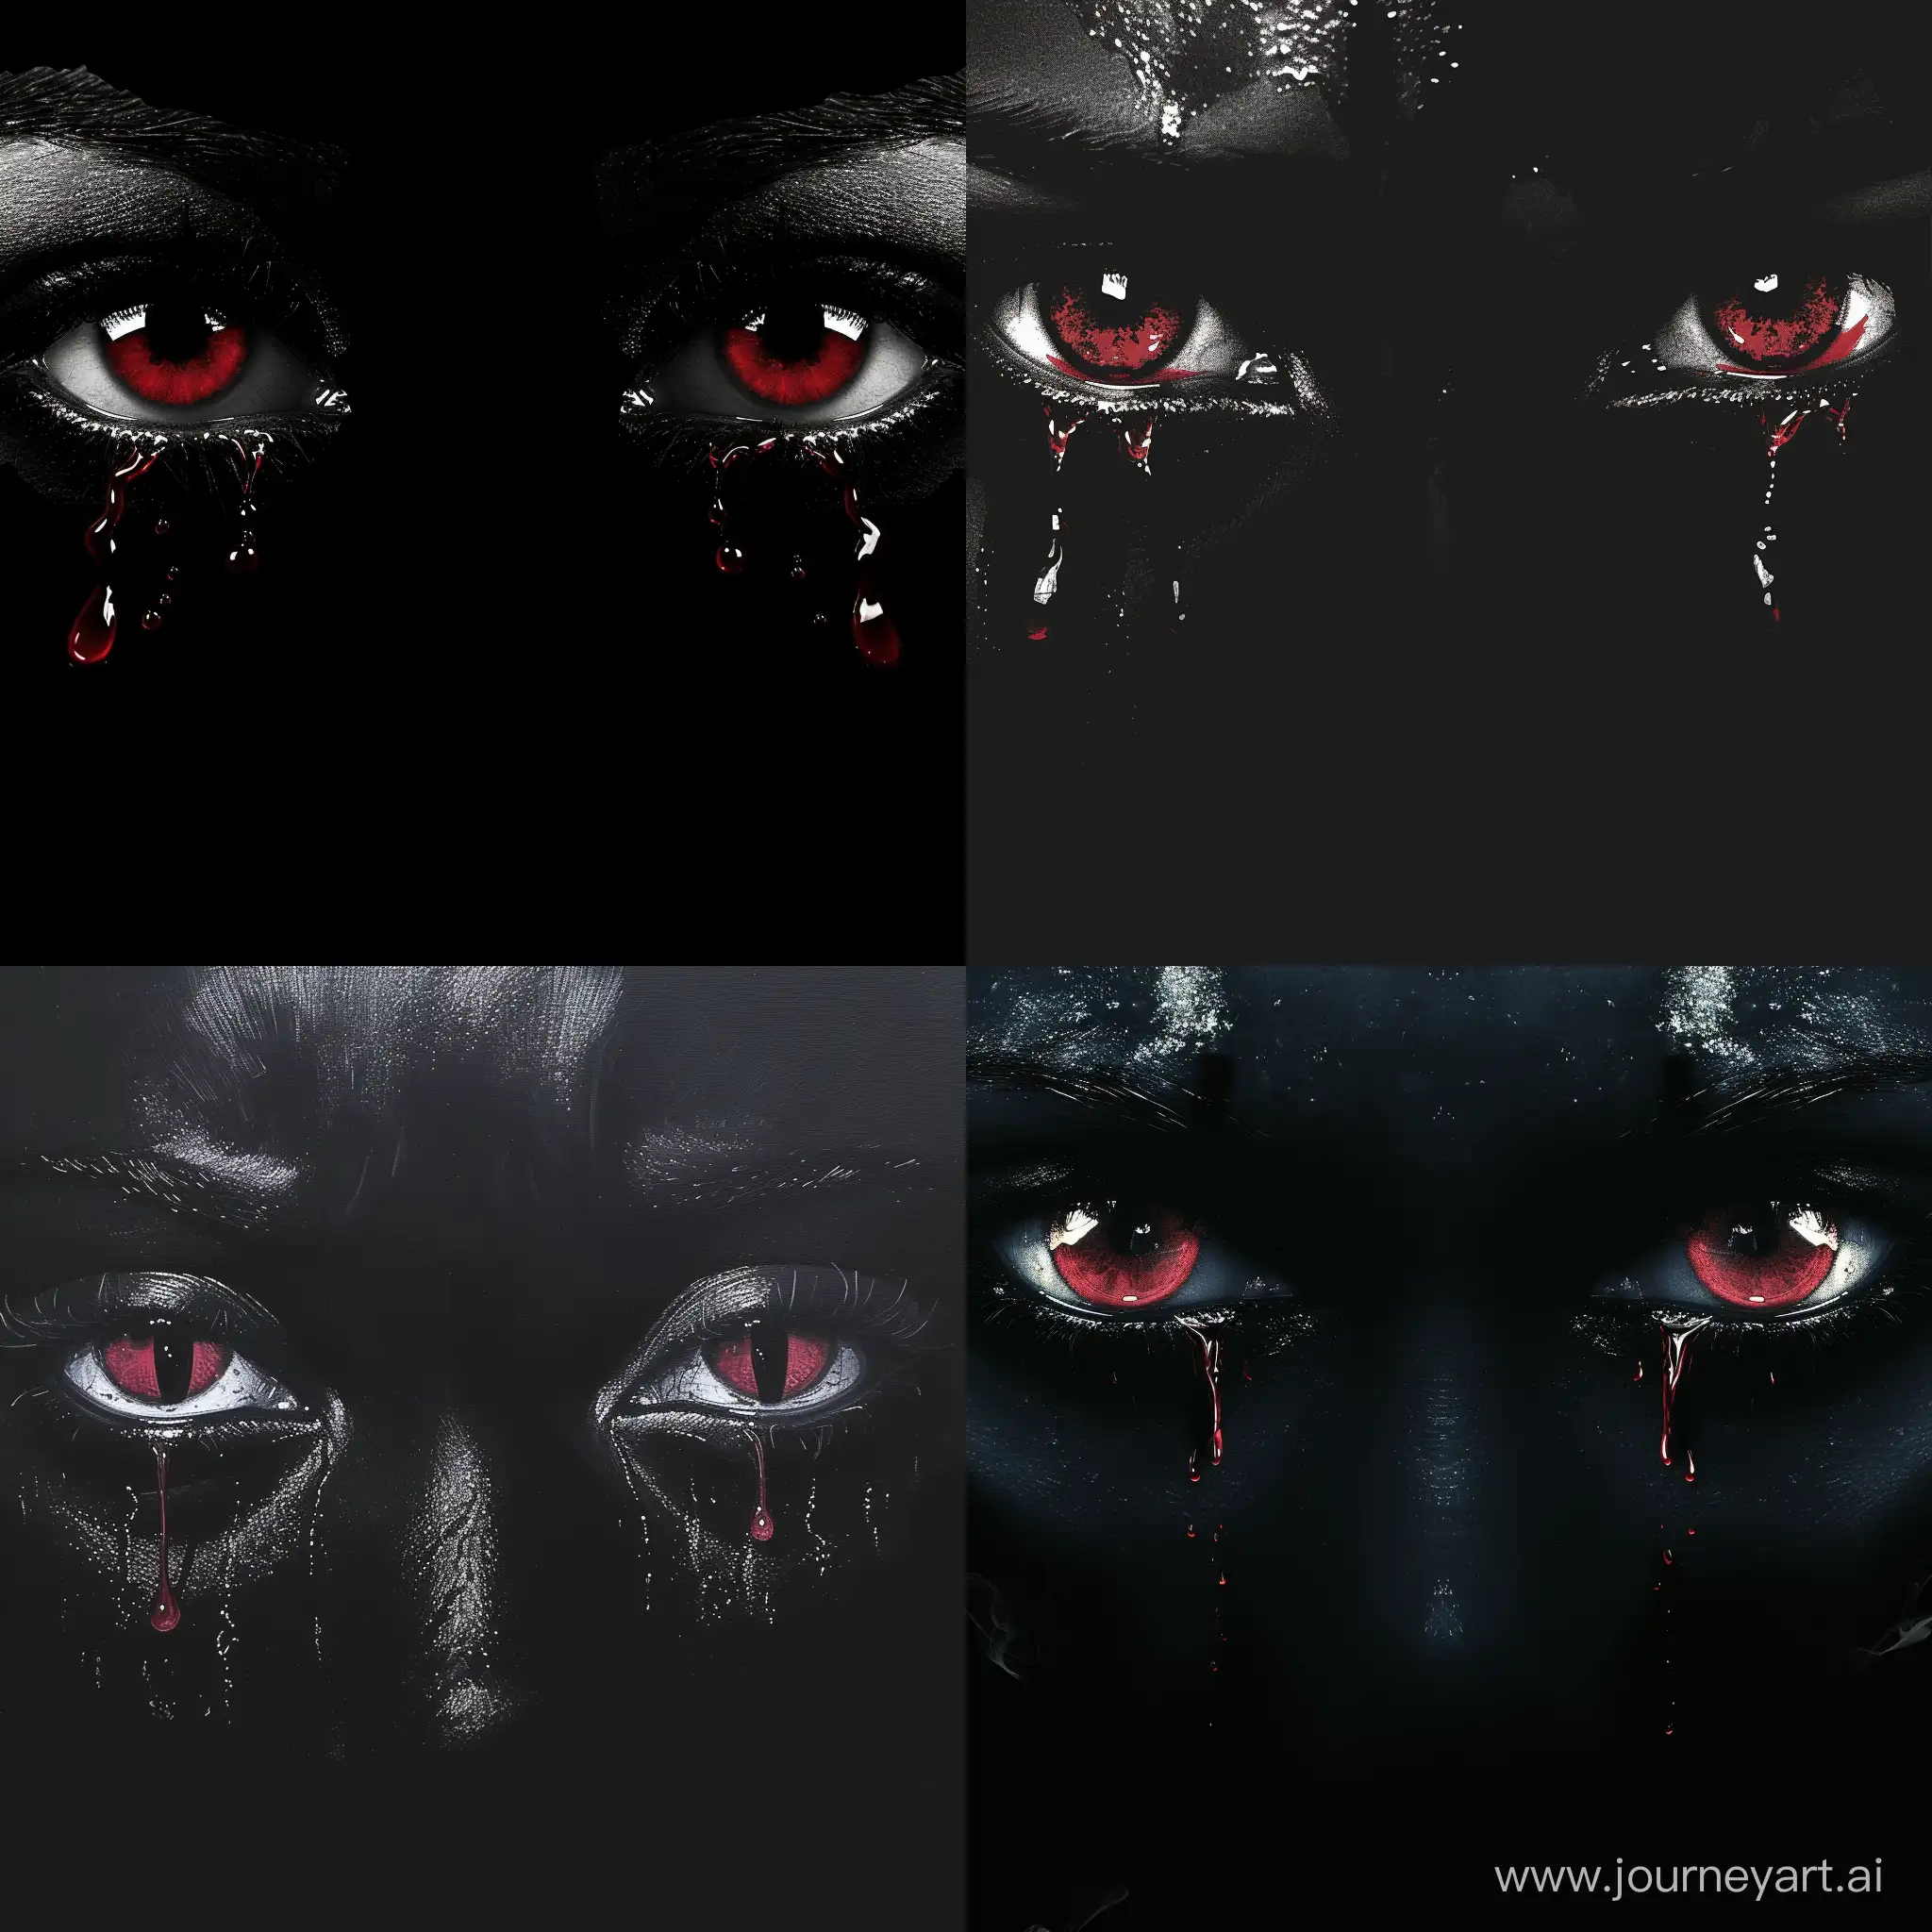 The two eyes that are shedding tears are red and the theme of the picture is black